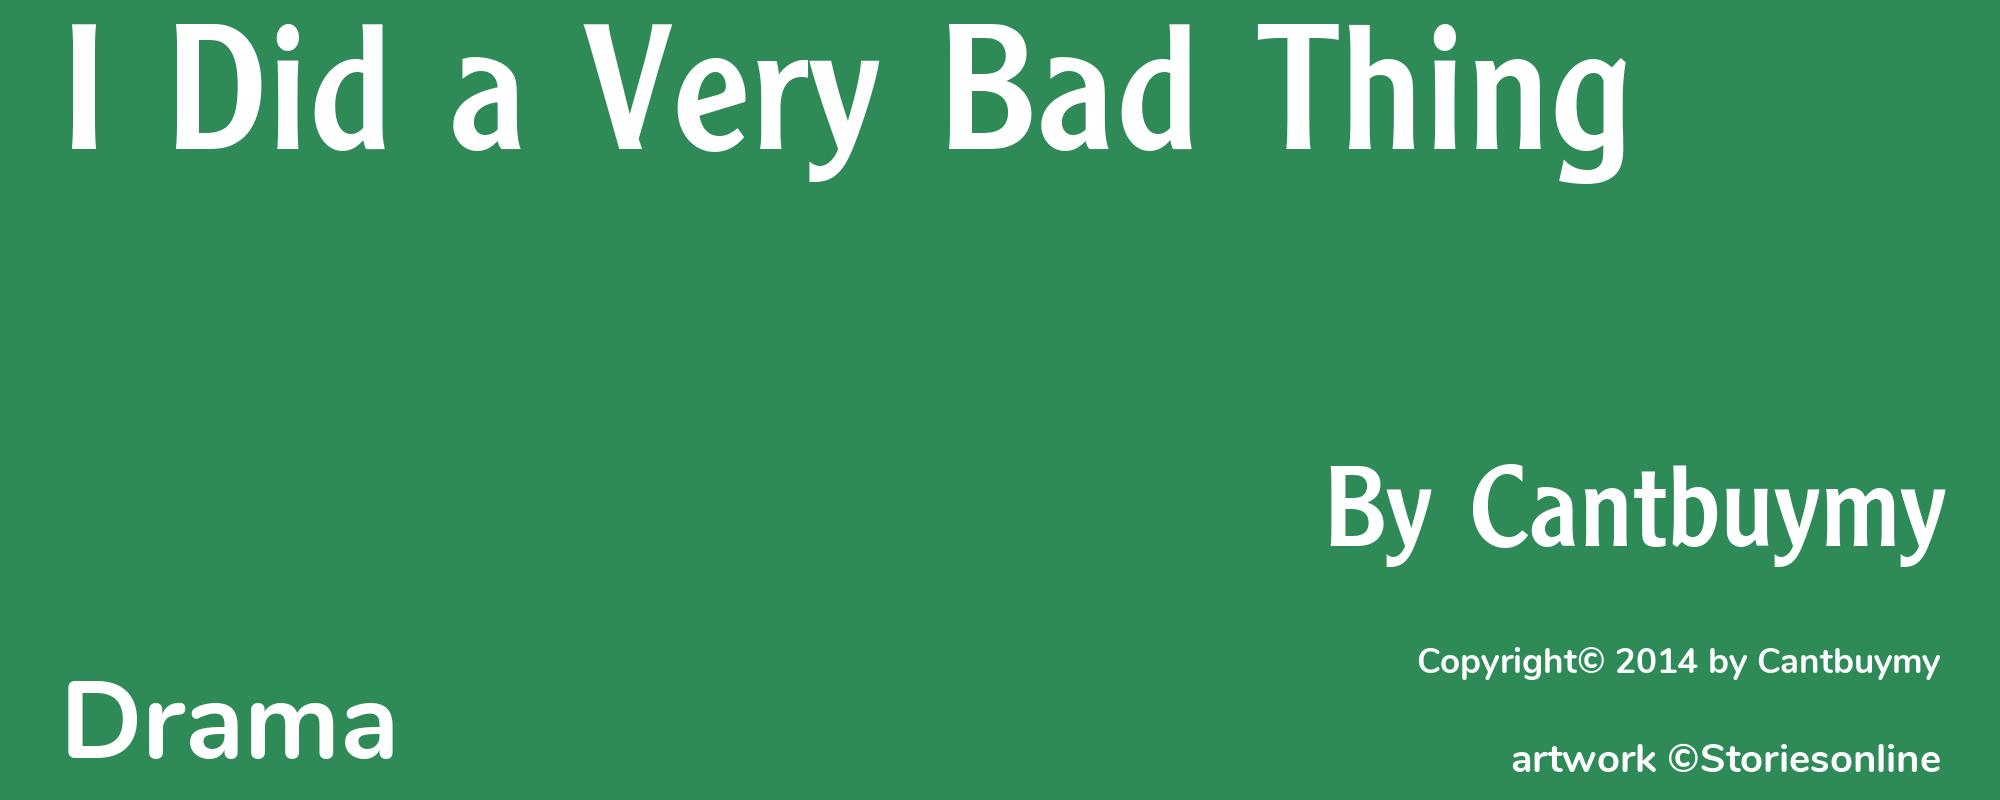 I Did a Very Bad Thing - Cover